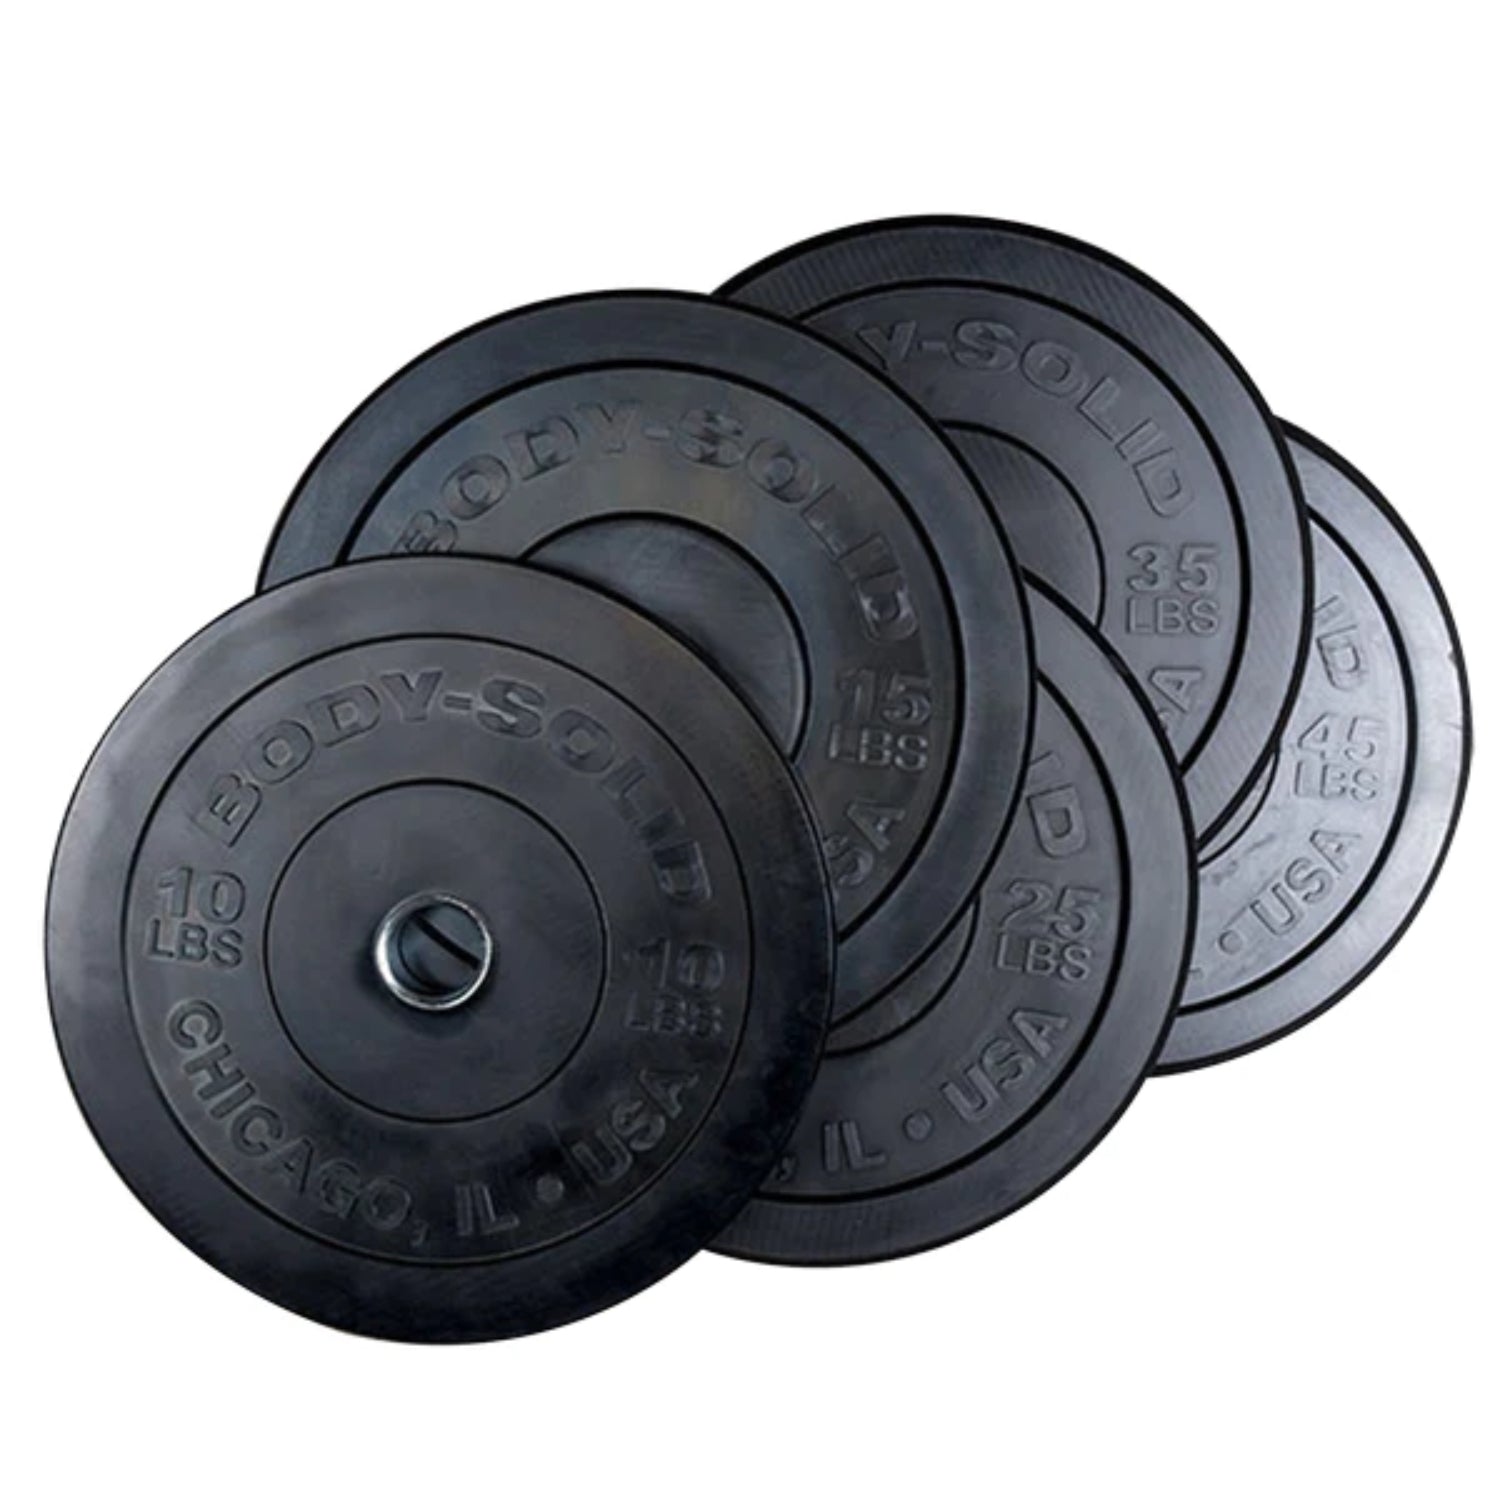 BODYSOLID CHICAGO BLACK OLYMPIC BUMPER PLATE